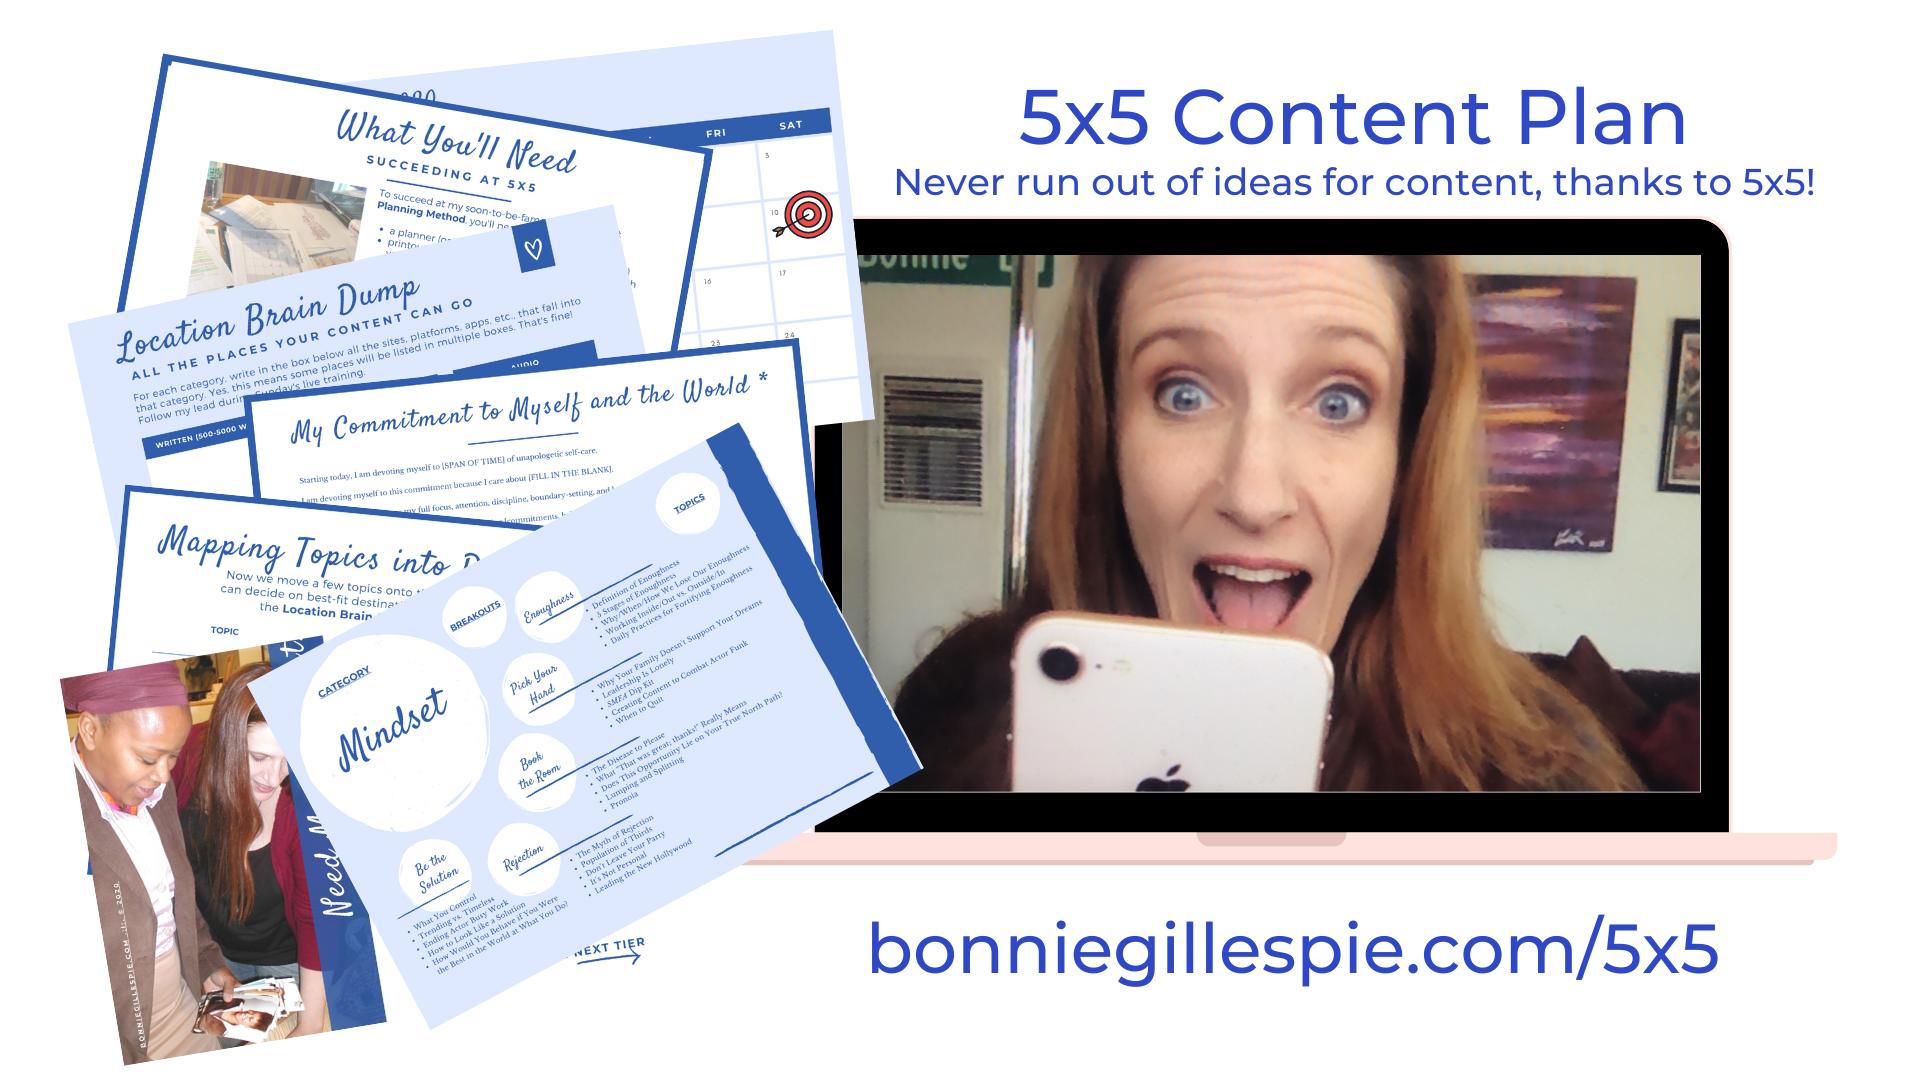 hero shots of pages from the 5x5 Content Plan workbook, laptop with white female excitedly livestreaming on her phone, text about the 5x5 Content Plan